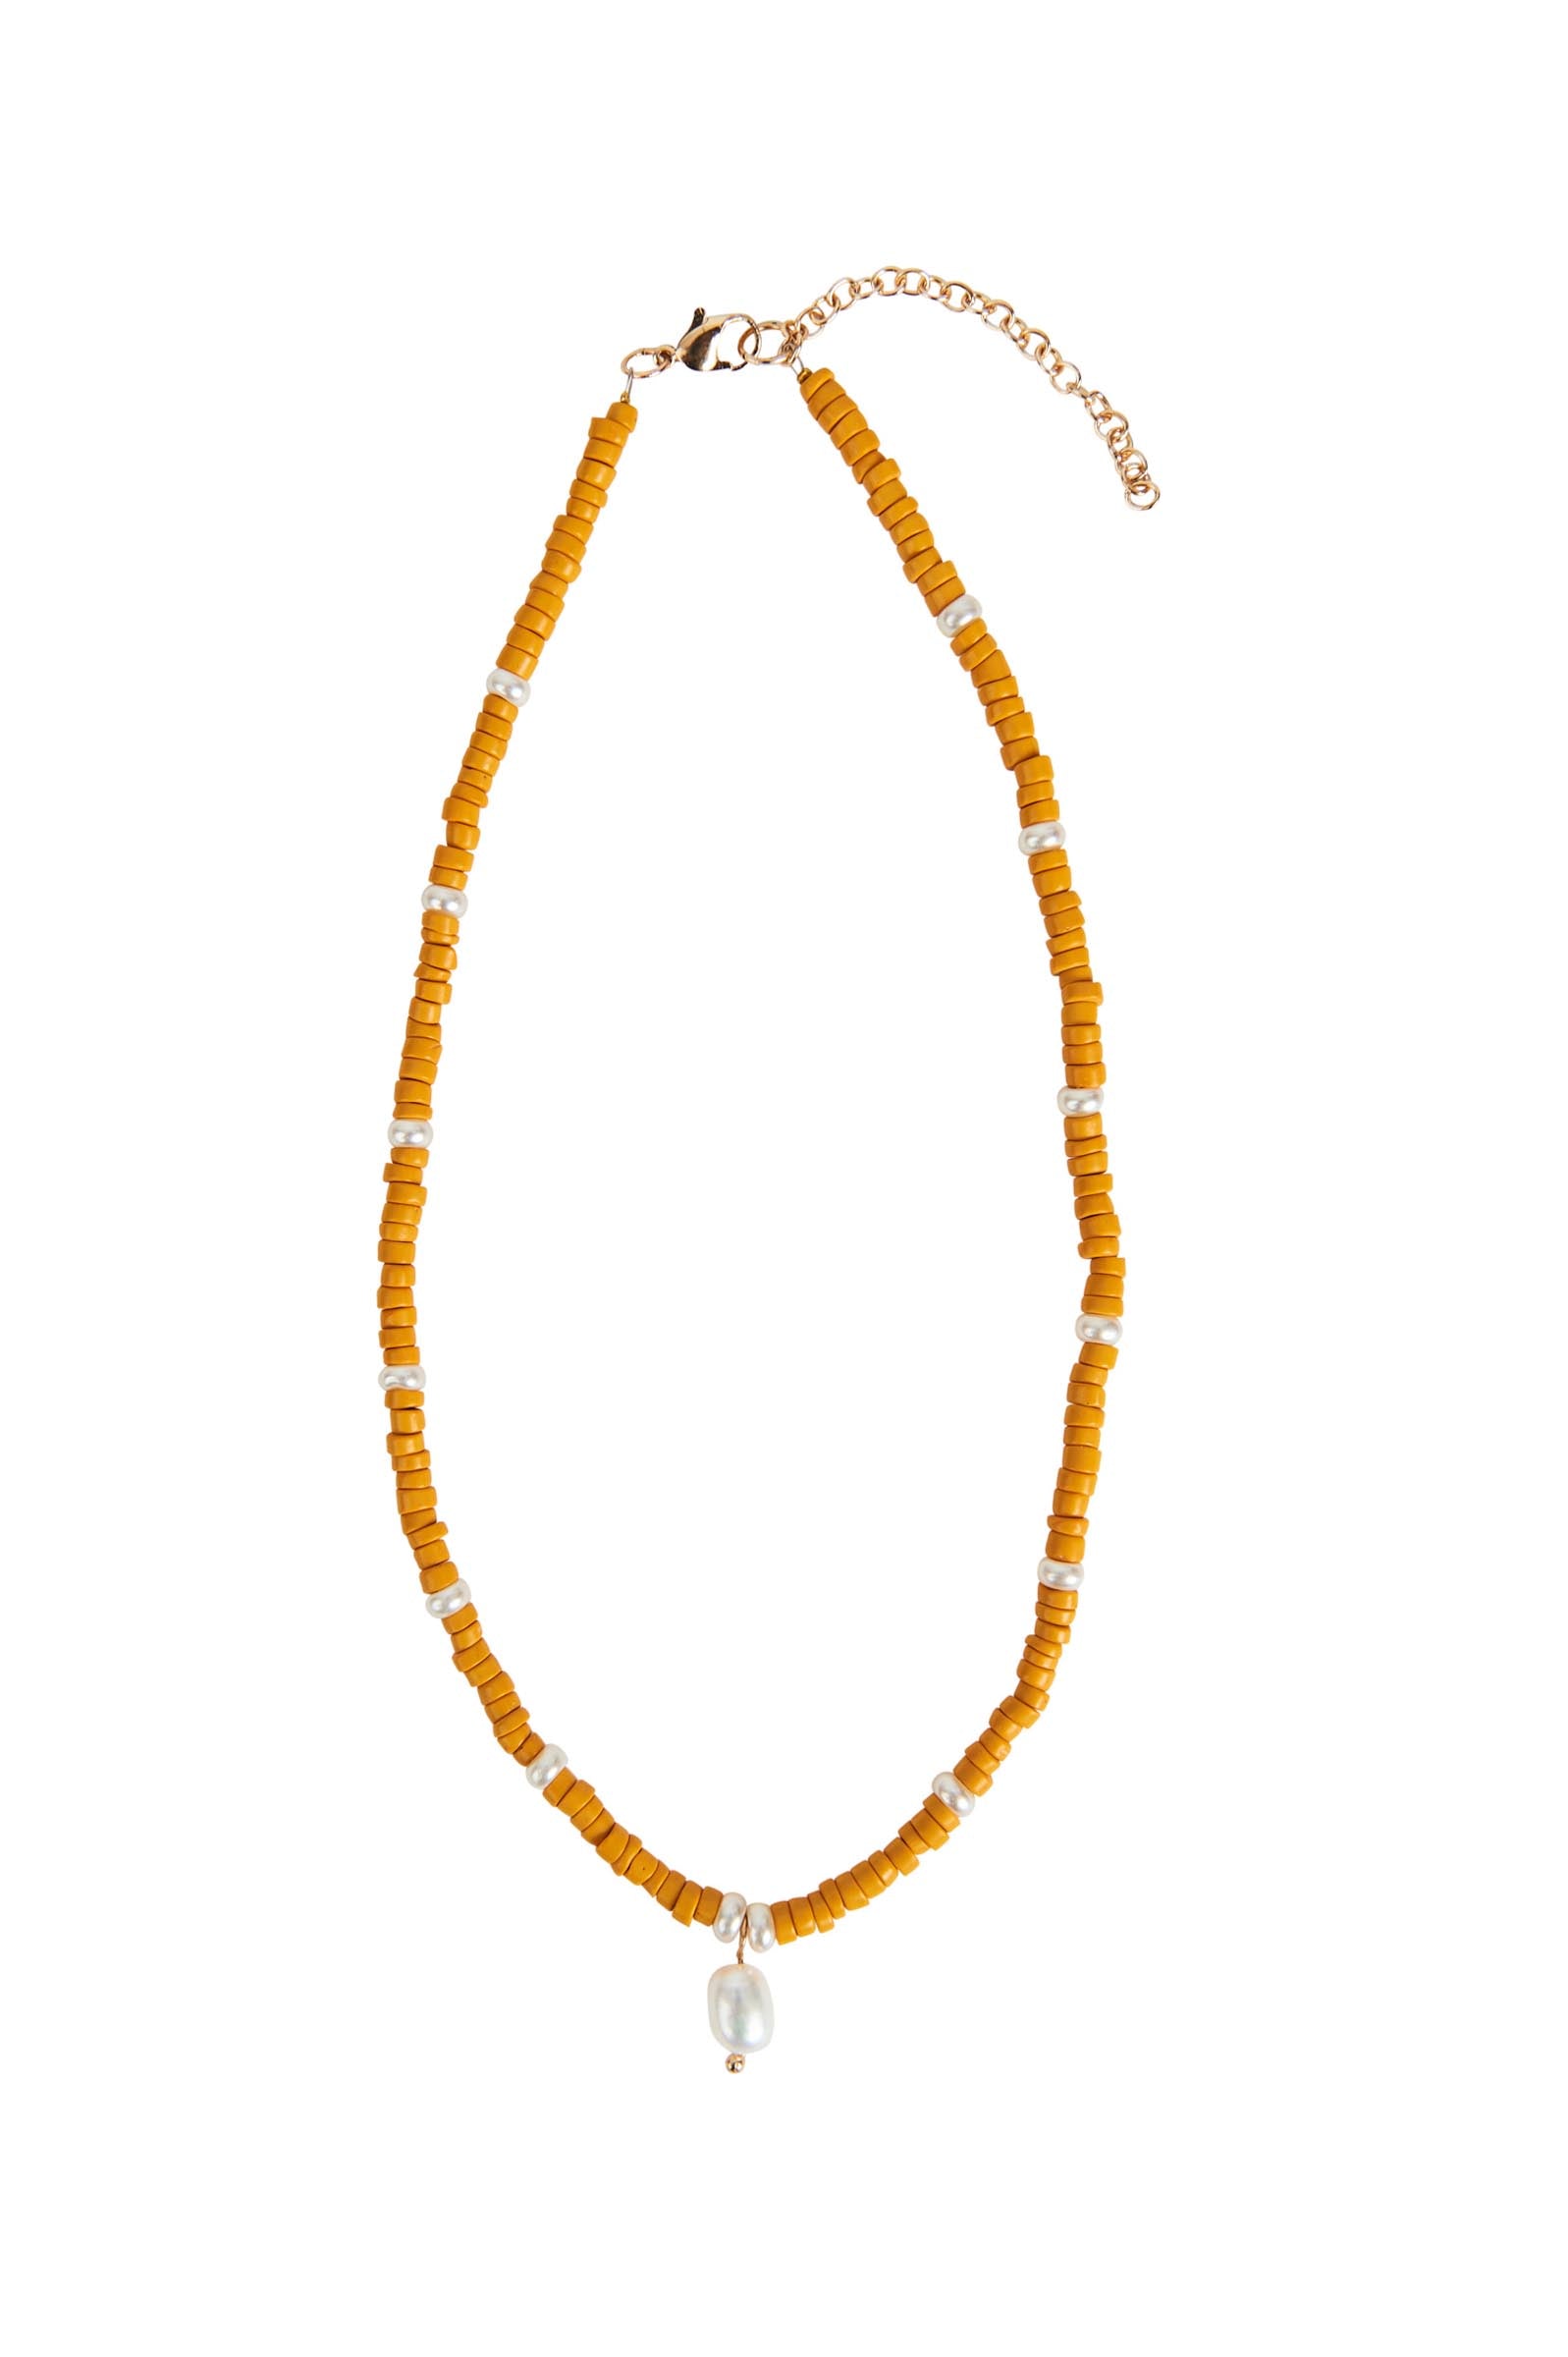 Mimosa Beaded Necklace - Honeycomb - eb&ive Necklace